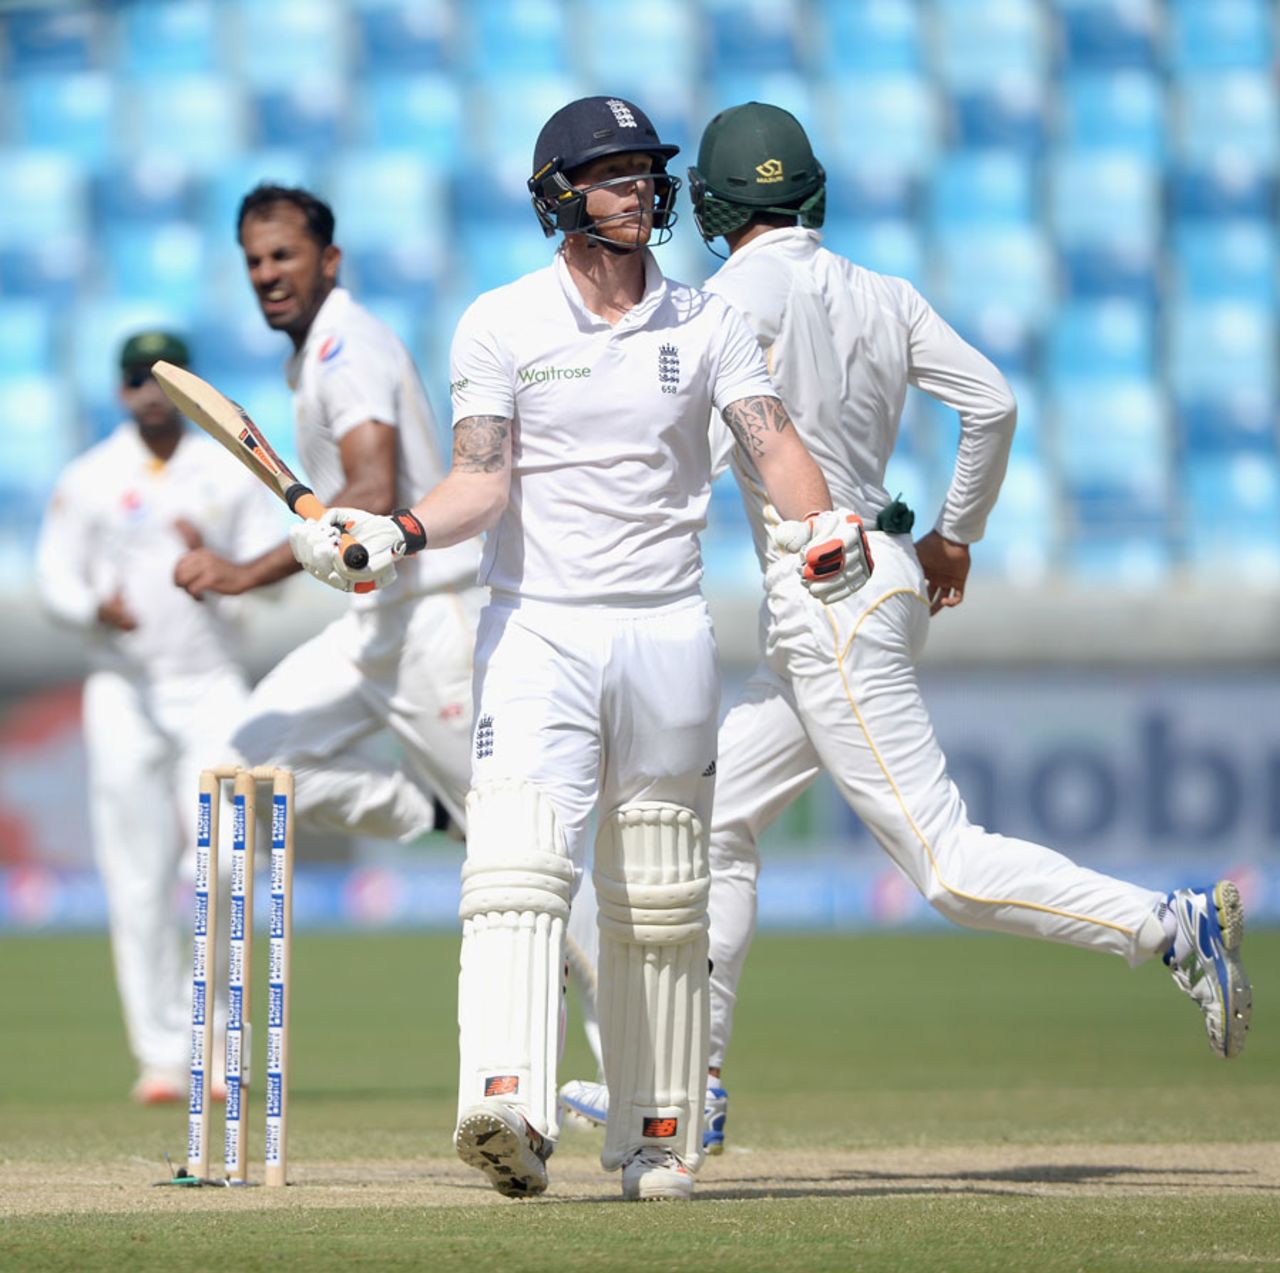 Ben Stokes was also caught behind off Wahab Riaz, Pakistan v England, 2nd Test, Dubai, 3rd day, October 24, 2015